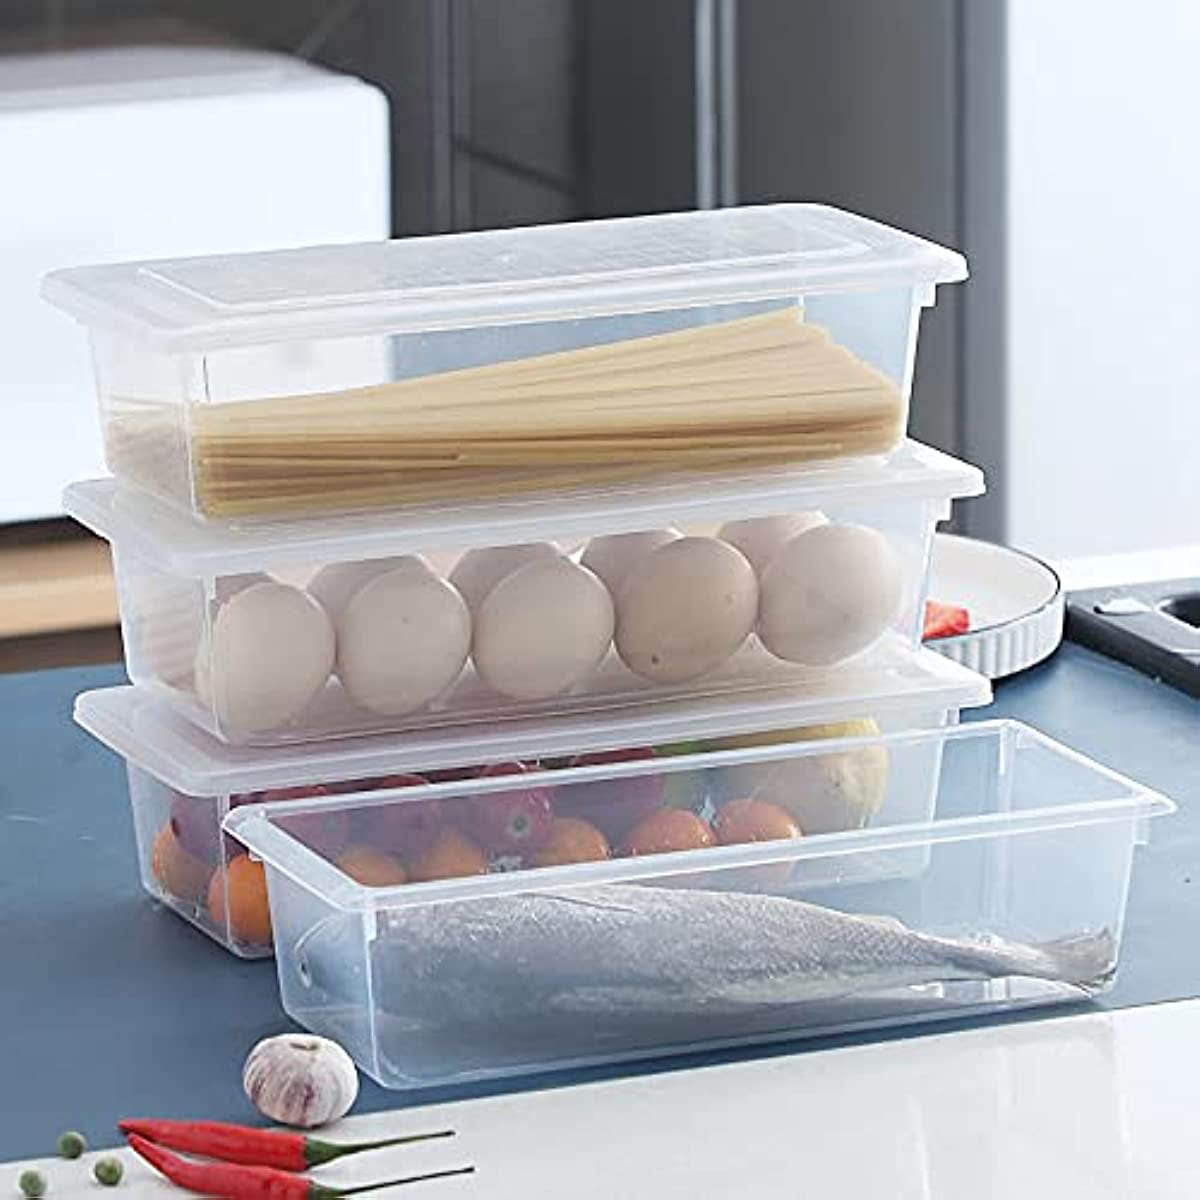 Ninesung 6 Pack Food Storage Containers for Fridge, 1.5L Produce